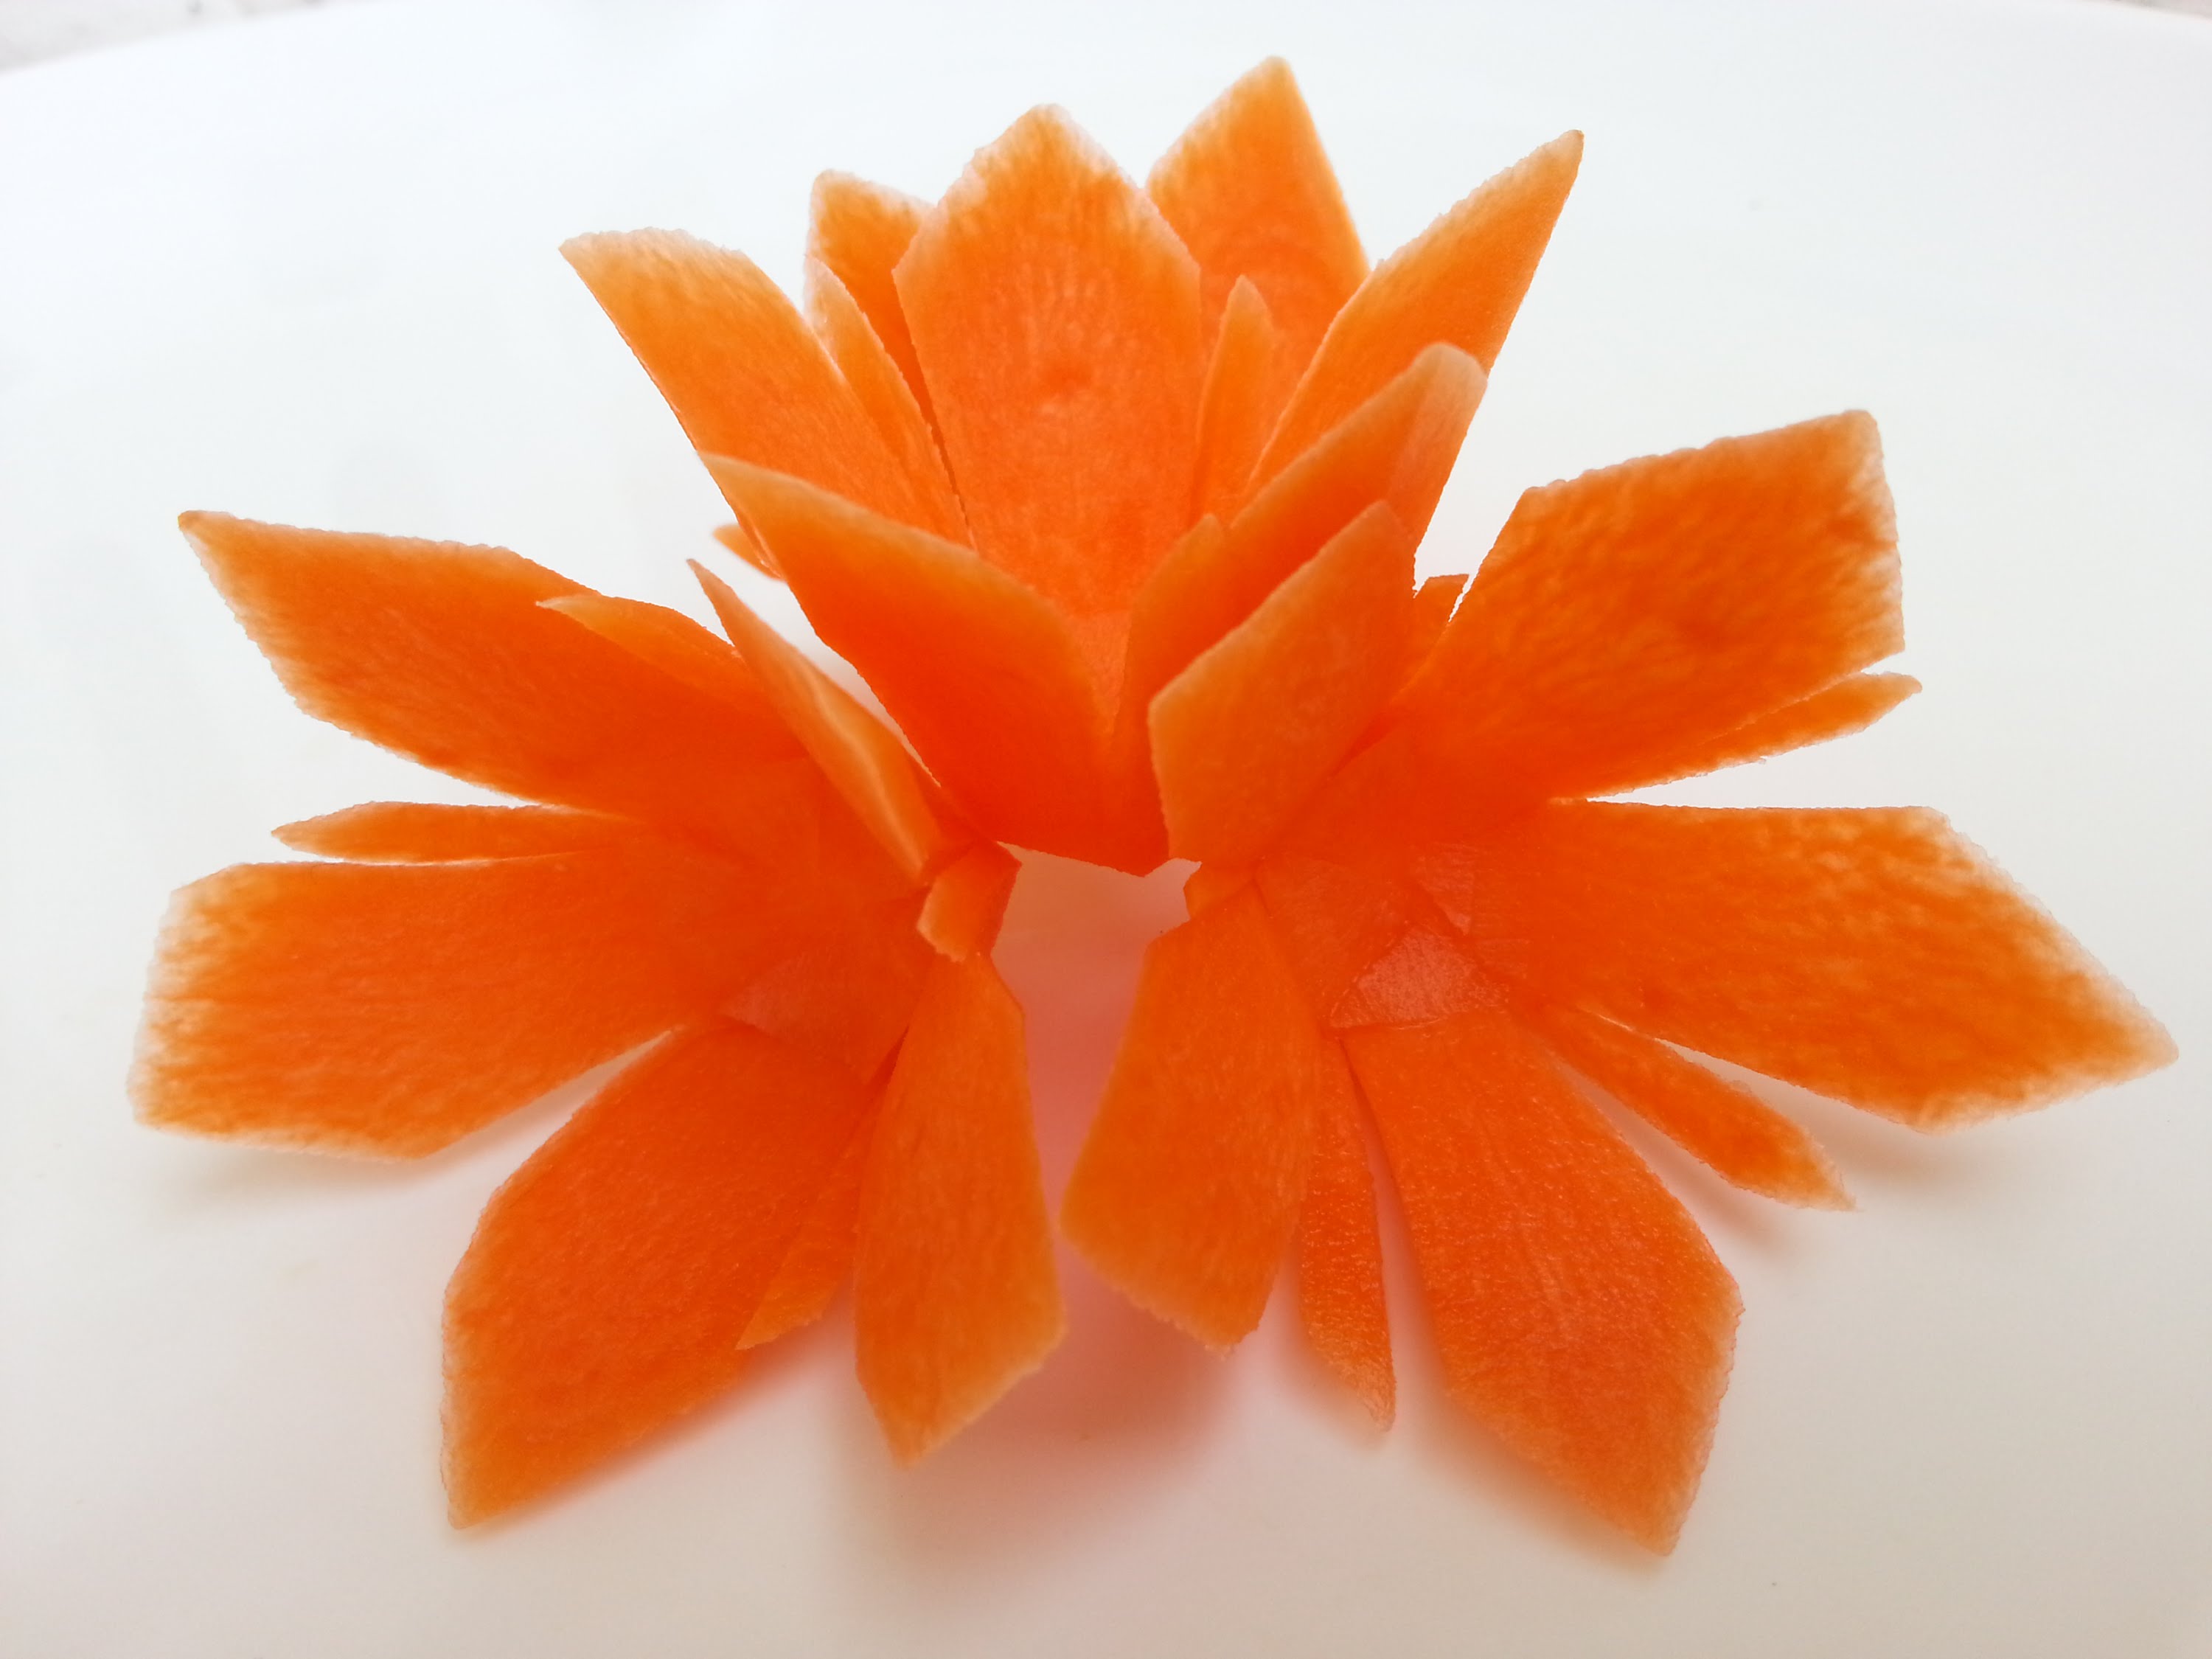 How to make a carrot flower - YouTube